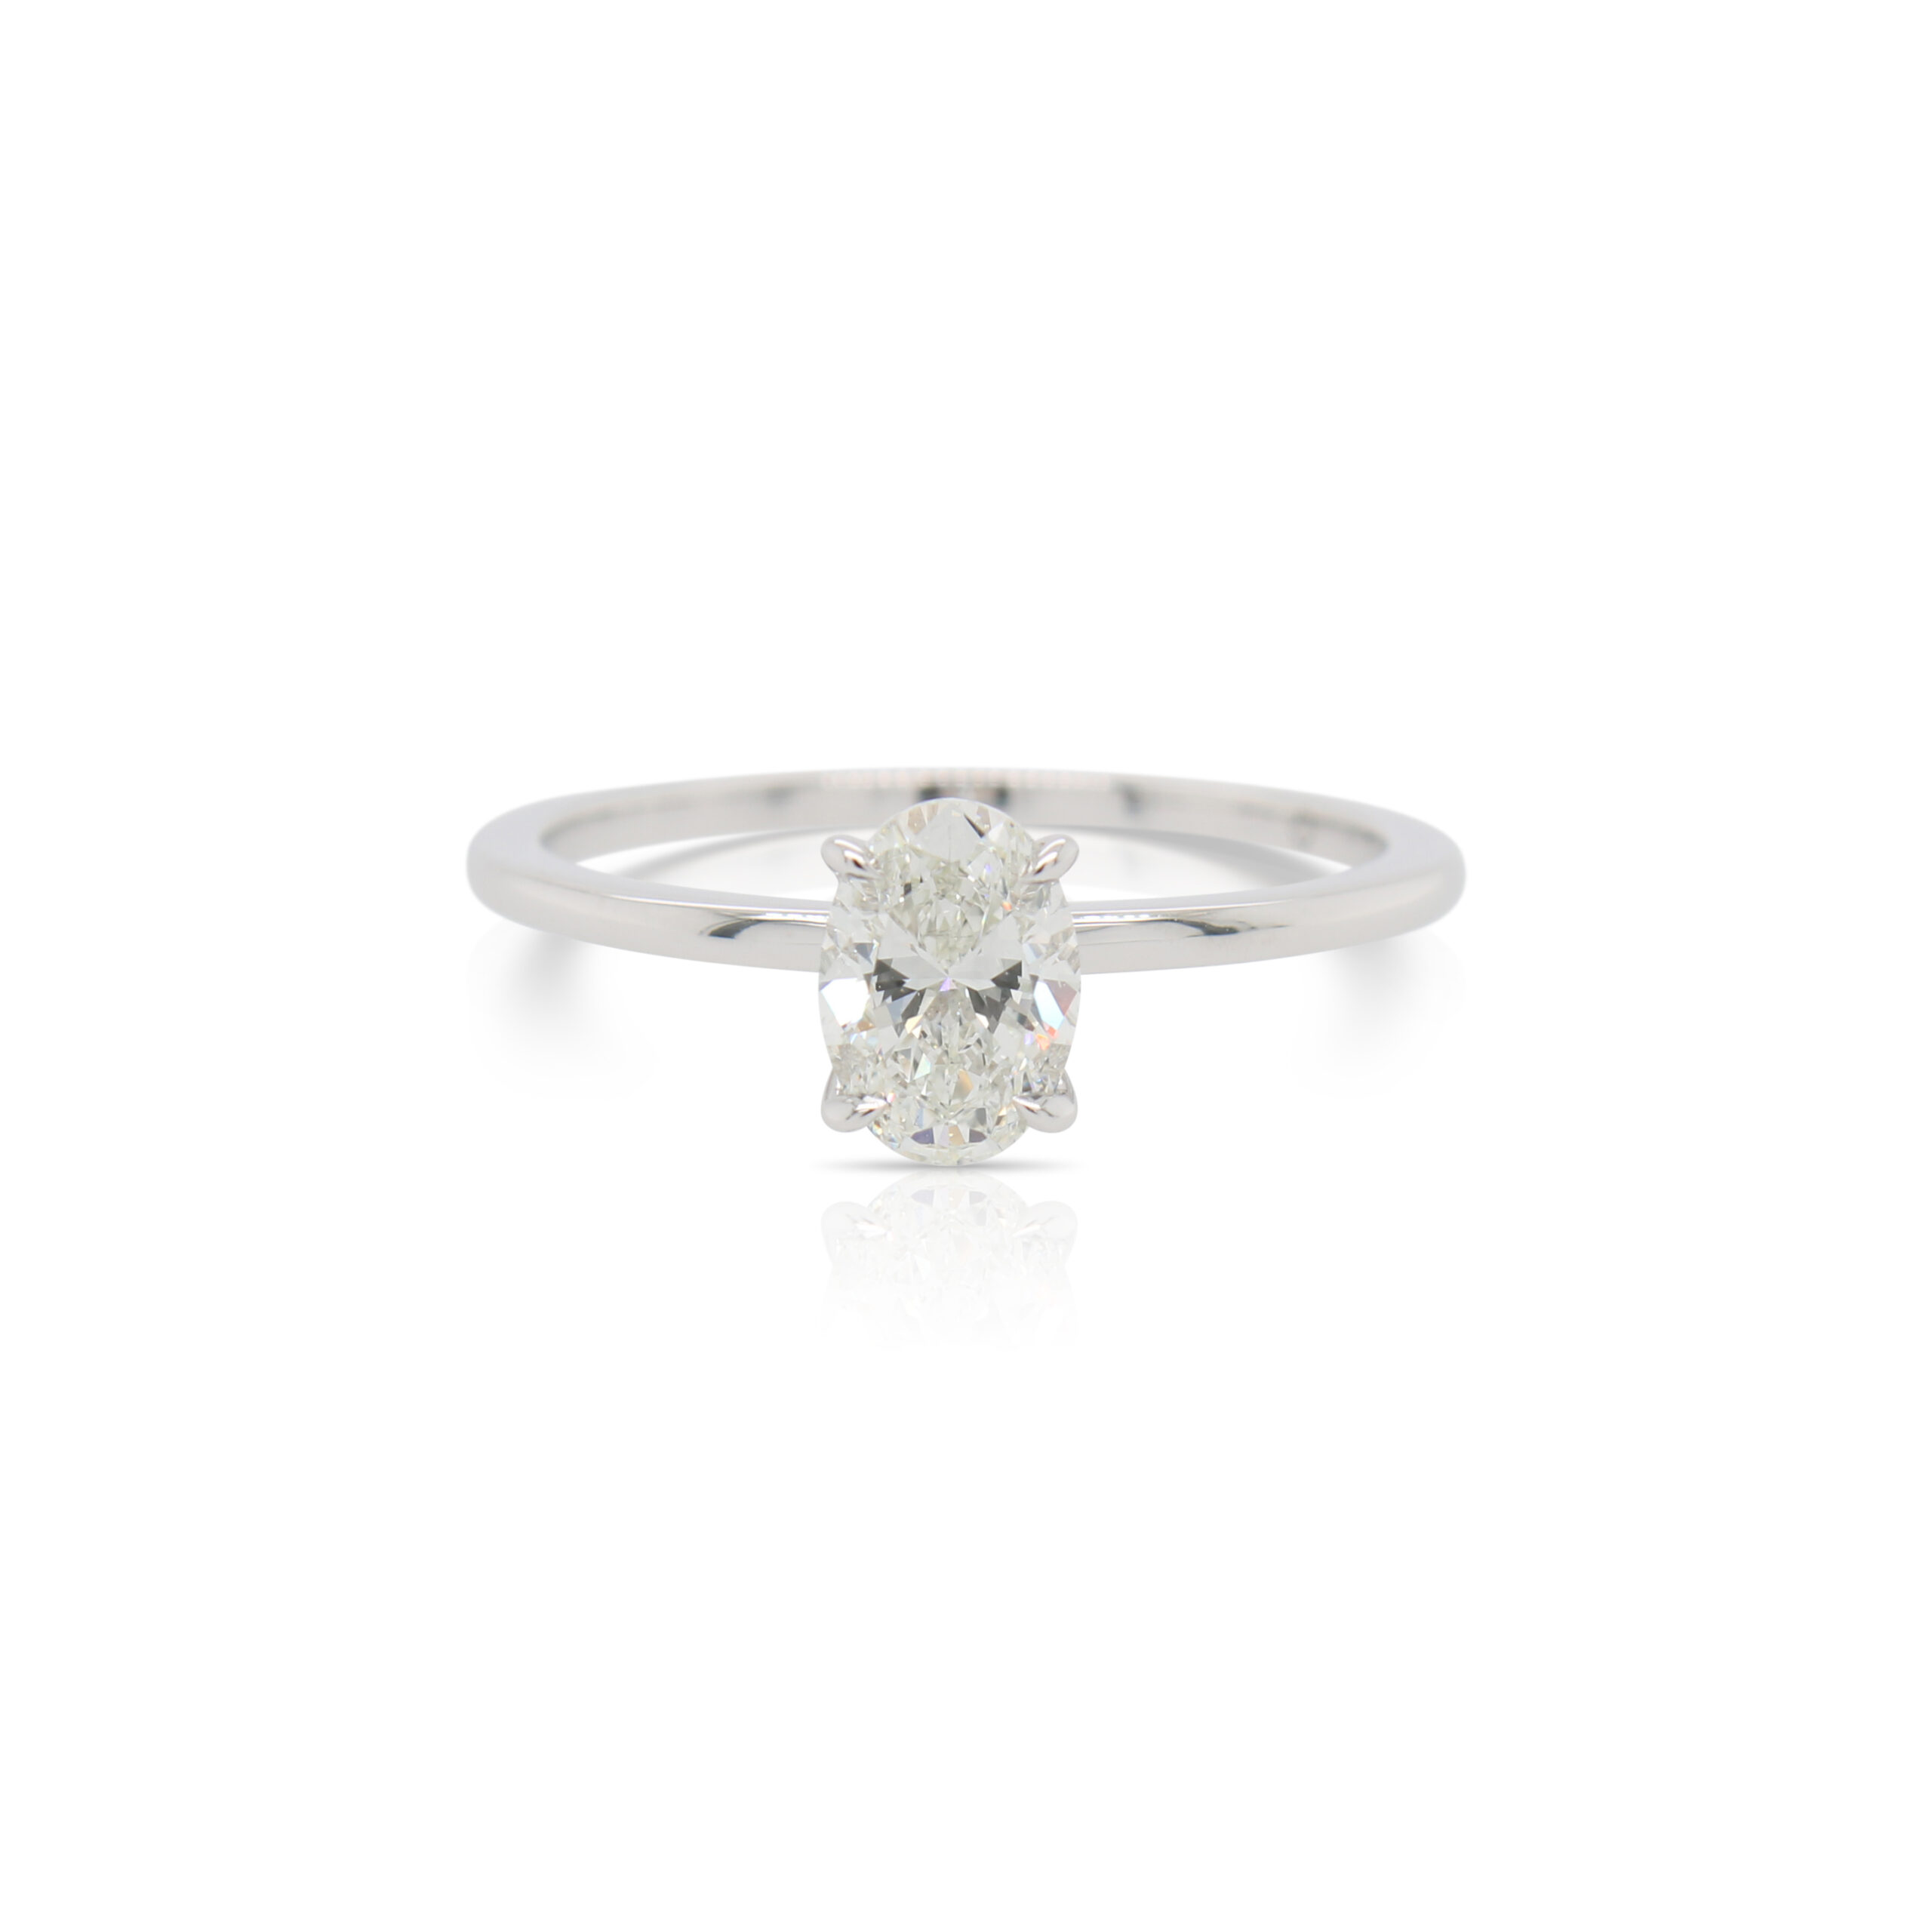 012278Solitaire-Oval-Diamond-Engagement-Ring.jpg